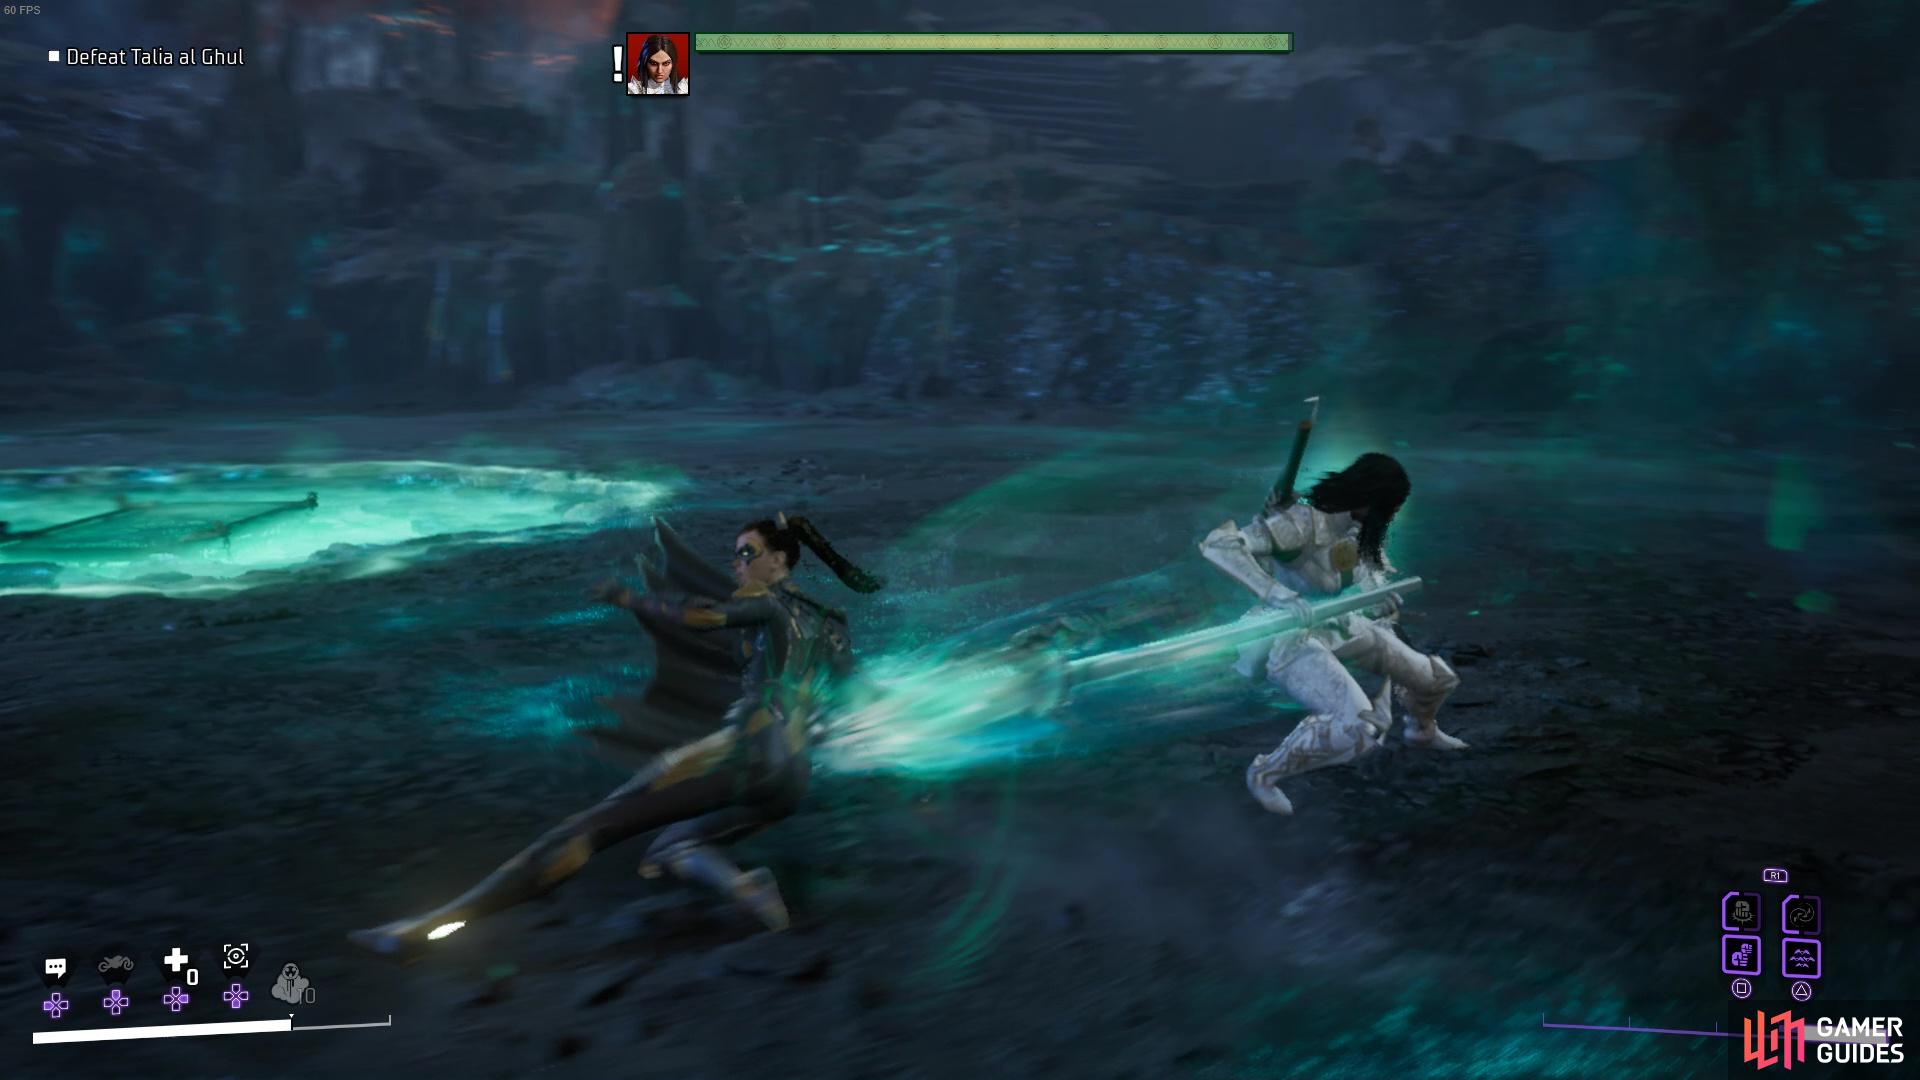 The spear is pretty tough to dodge!